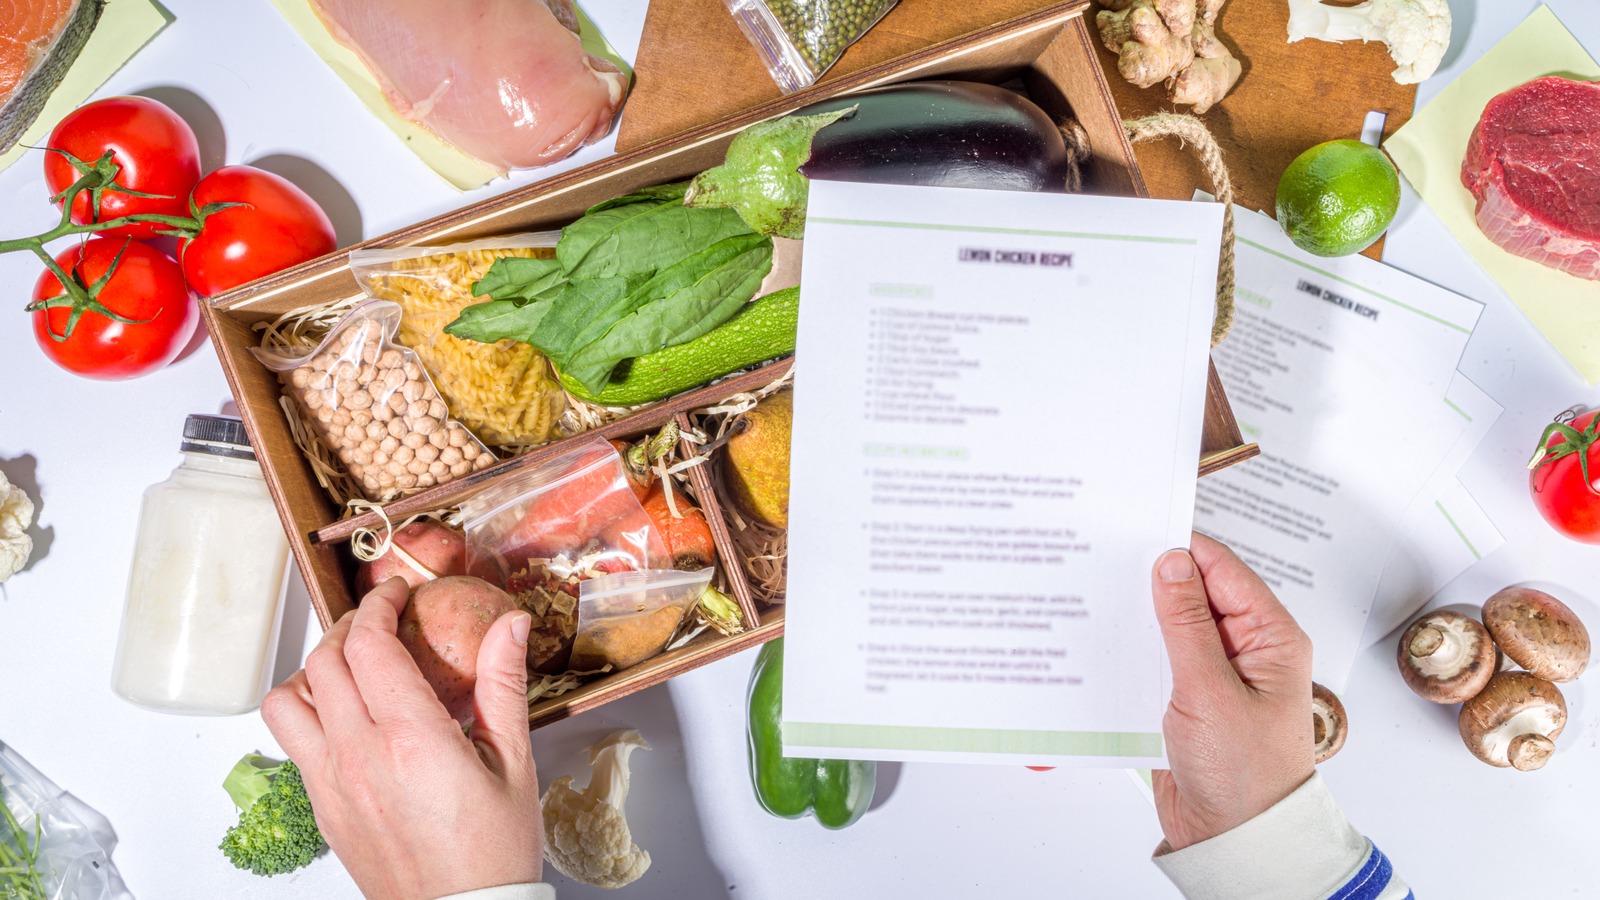 Factor Meal Delivery Review (2023) – Forbes Health